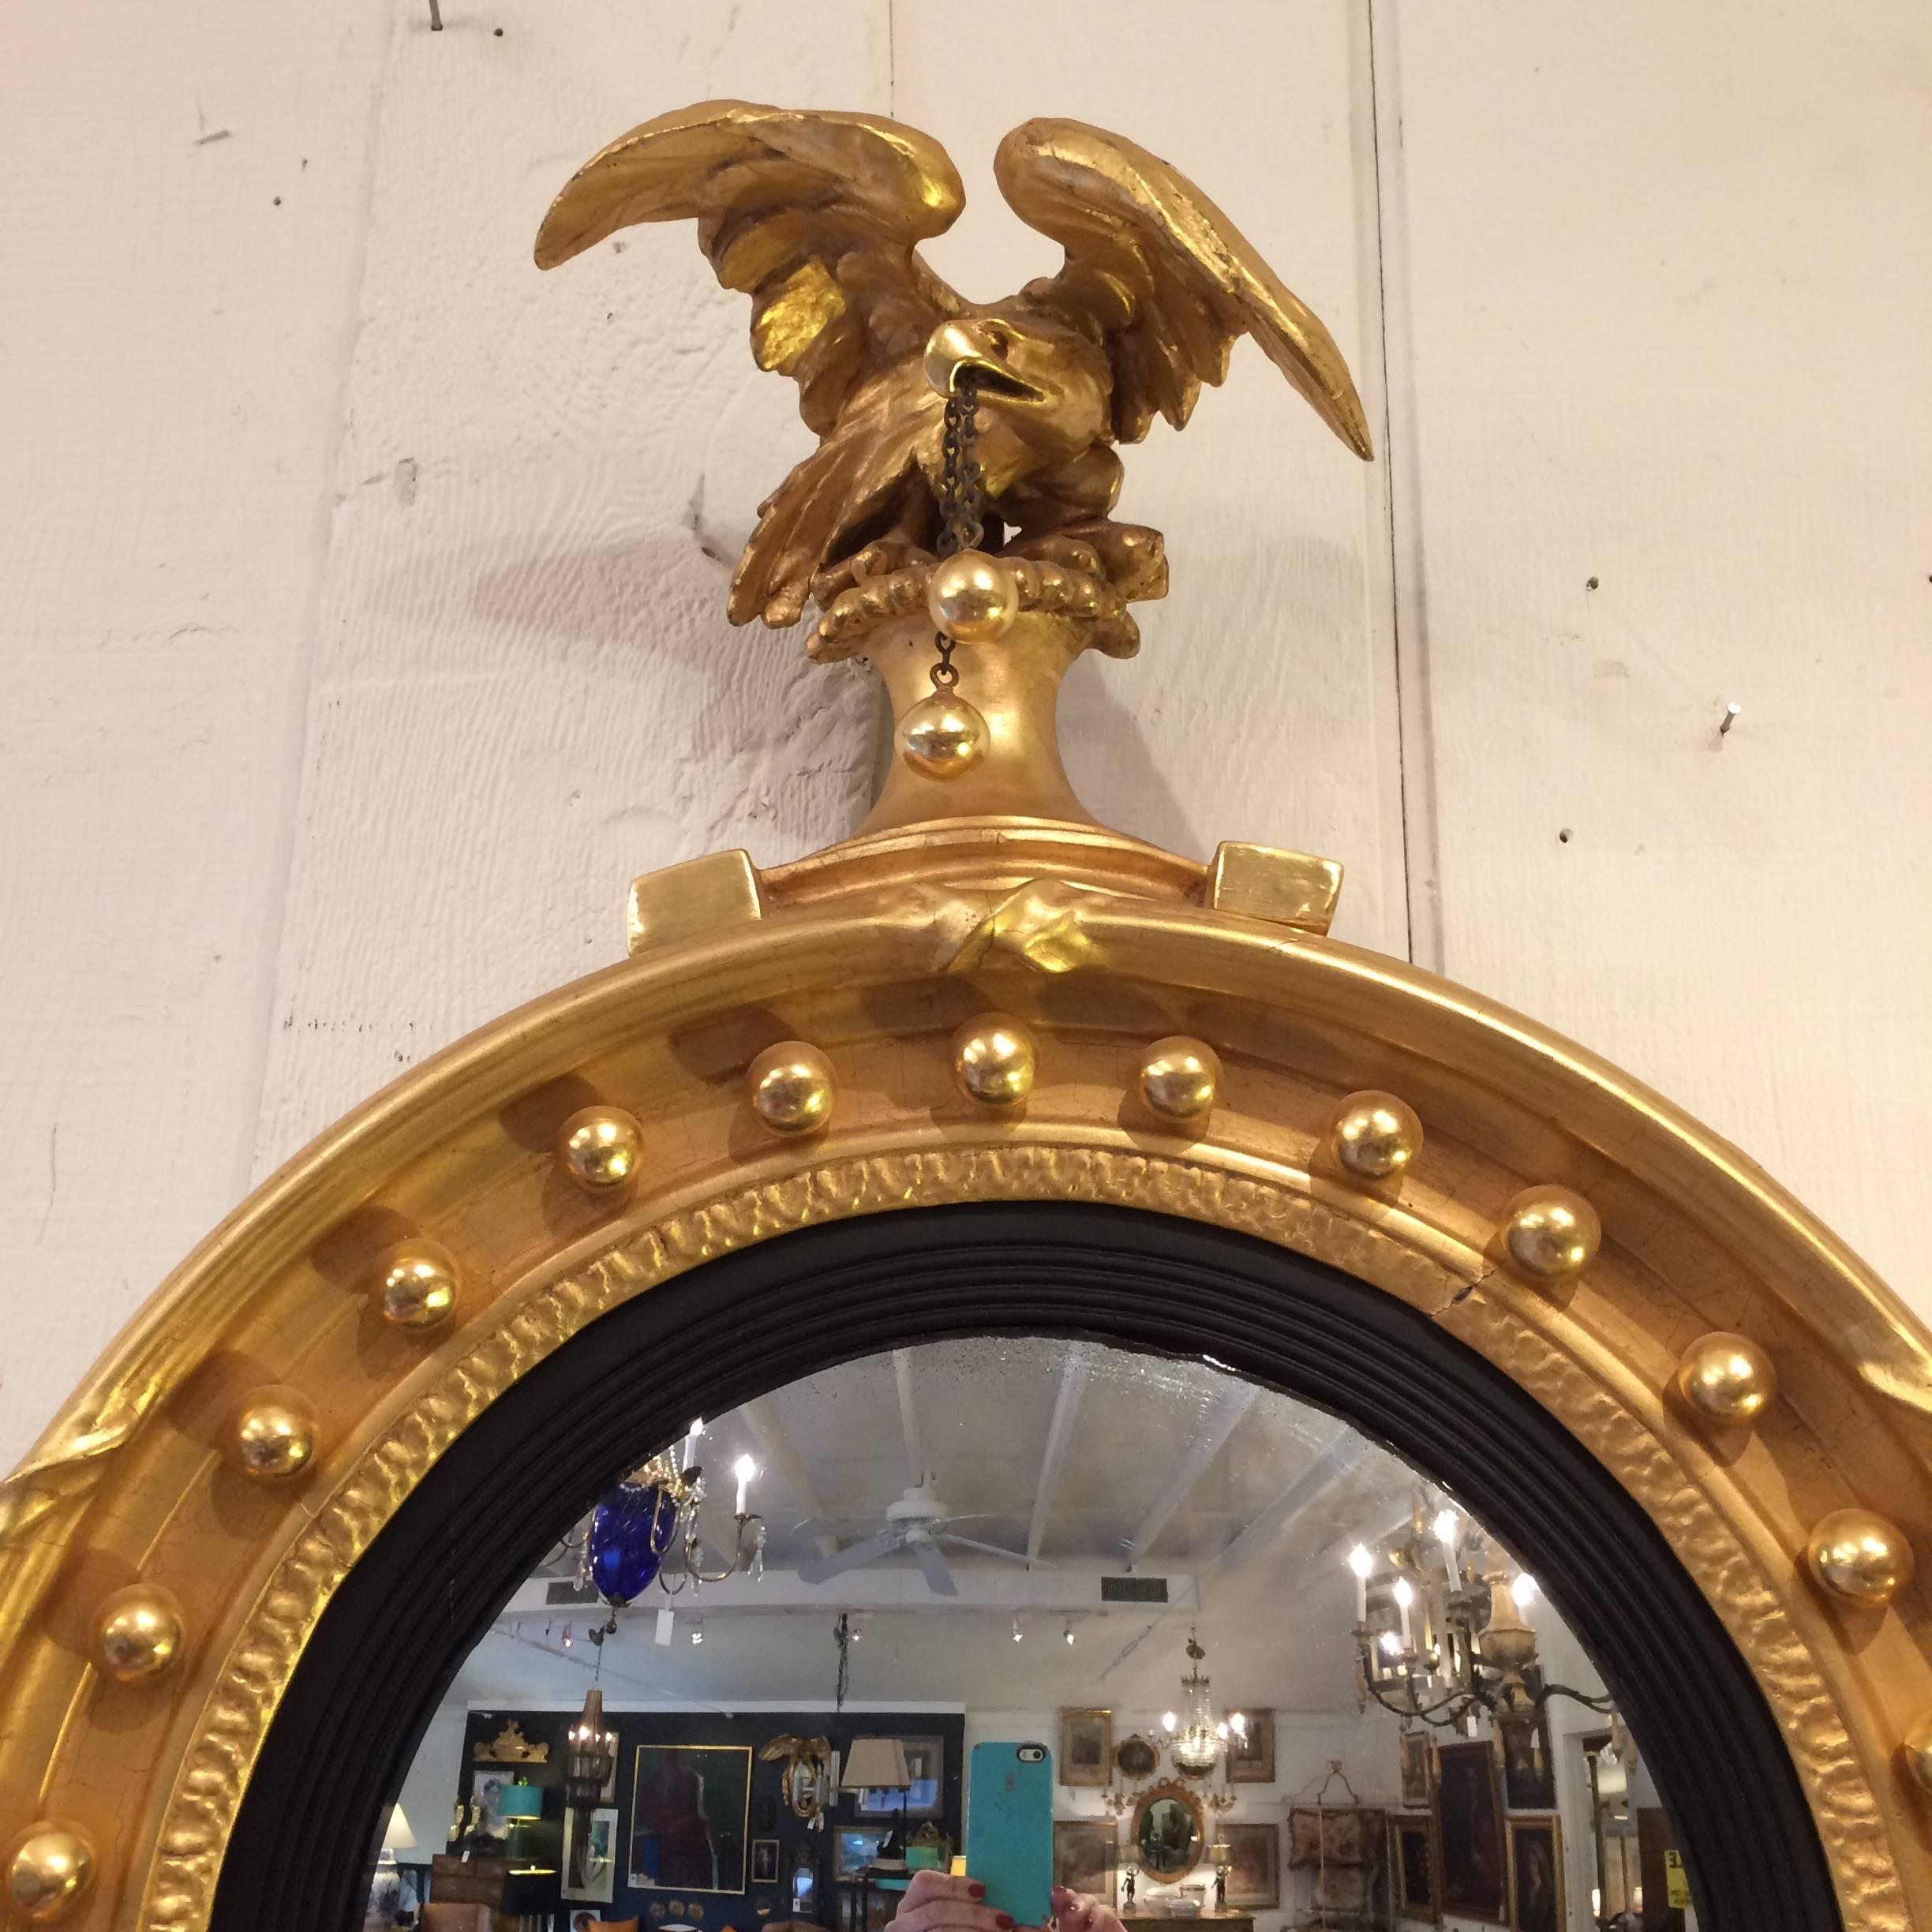 Gorgeous example of a giltwood fully restored Federal mirror with circular cove carved frame with inset gilded spherules, proud eagle at the top that dangles two glistening balls from it's beak, with an adornment of leaves at the bottom.